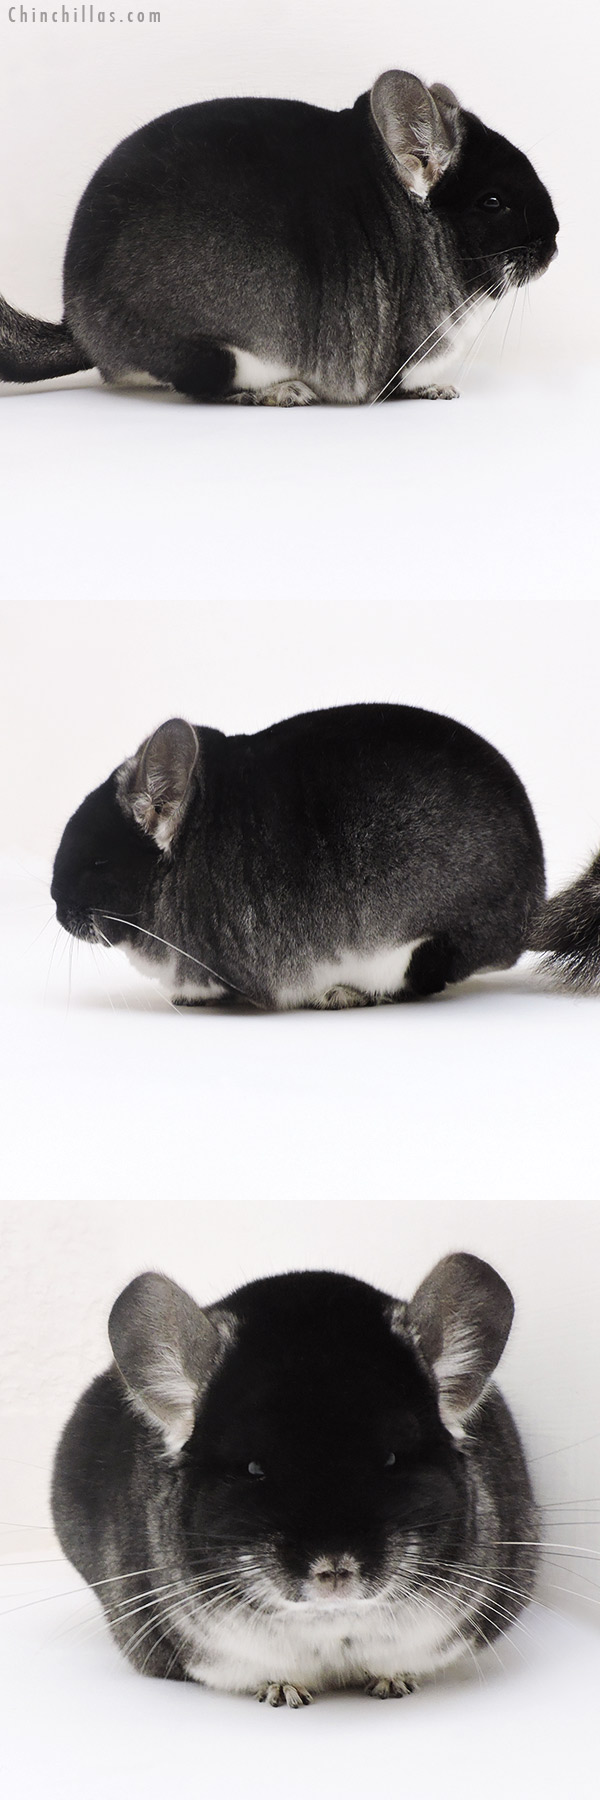 Chinchilla or related item offered for sale or export on Chinchillas.com - 17128 Blocky Brevi Type Show Quality Black Velvet Male Chinchilla